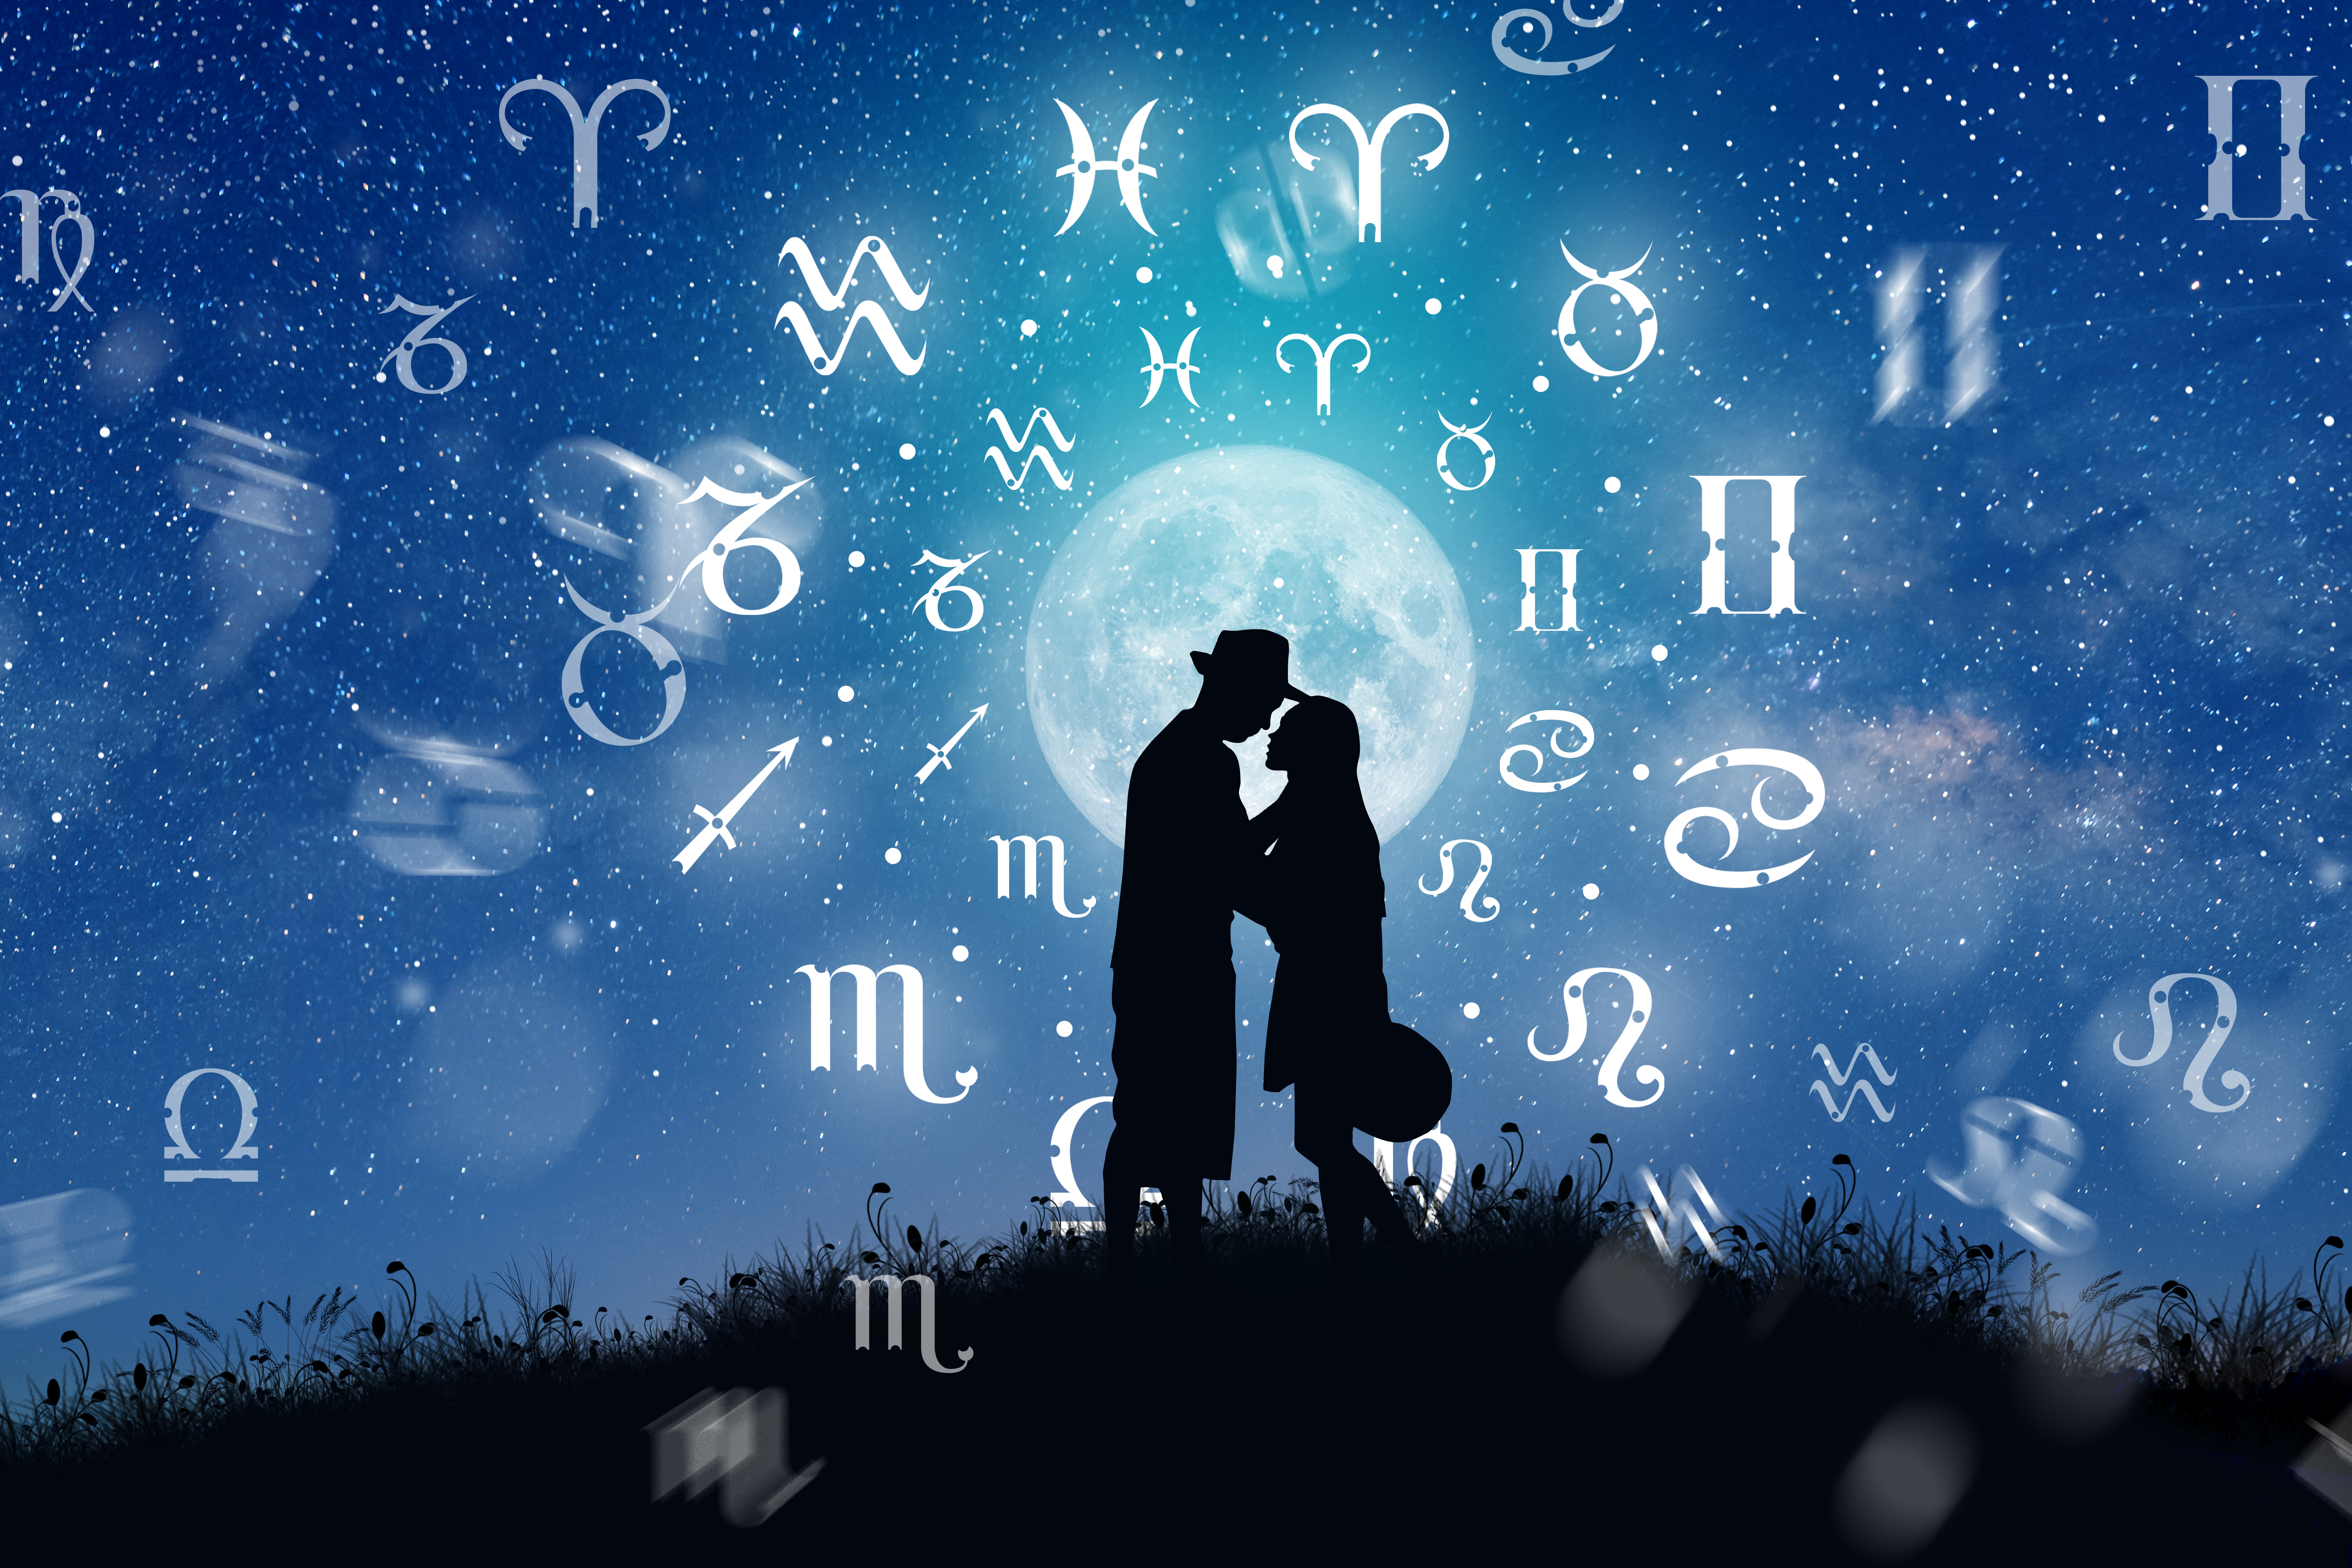 Silhouettes of a man and woman in front of a moon and starry sky, surrounded by the zodiac signs